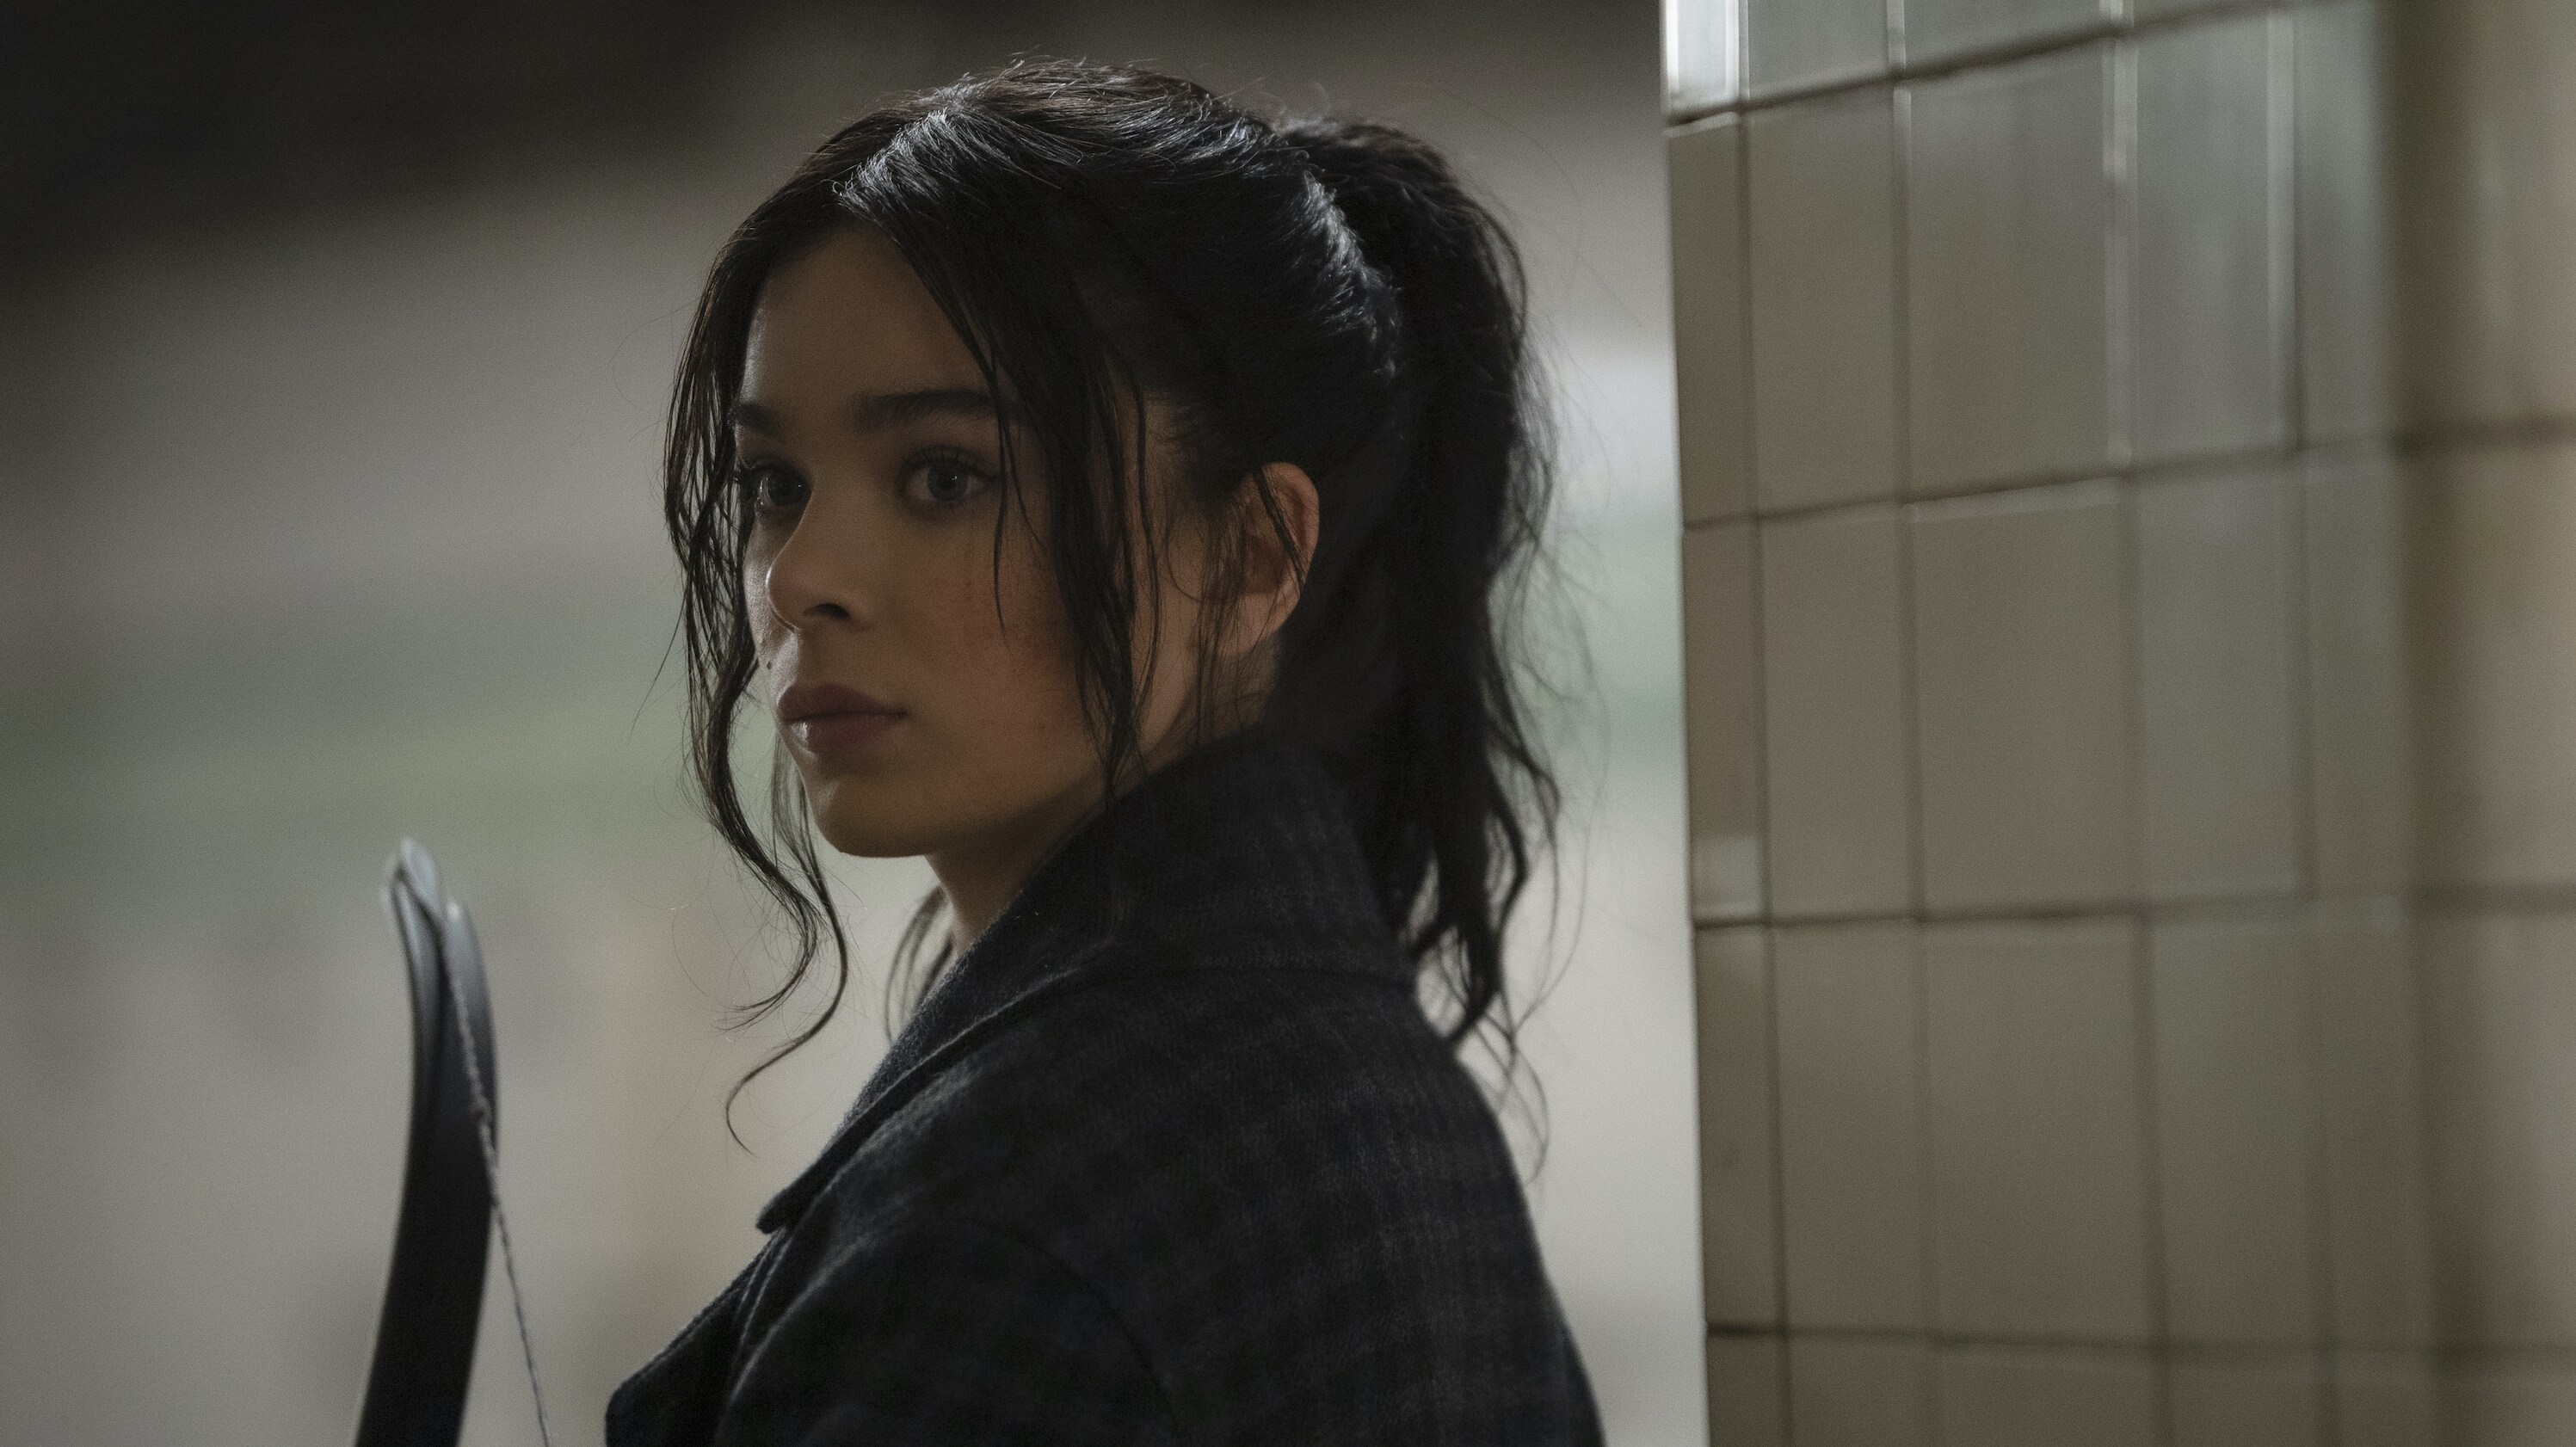 Kate Bishop (Hailee Steinfeld) in Marvel Studios' HAWKEYE, exclusively on Disney+. Photo by Chuck Zlotnick. ©Marvel Studios 2021. All Rights Reserved. 